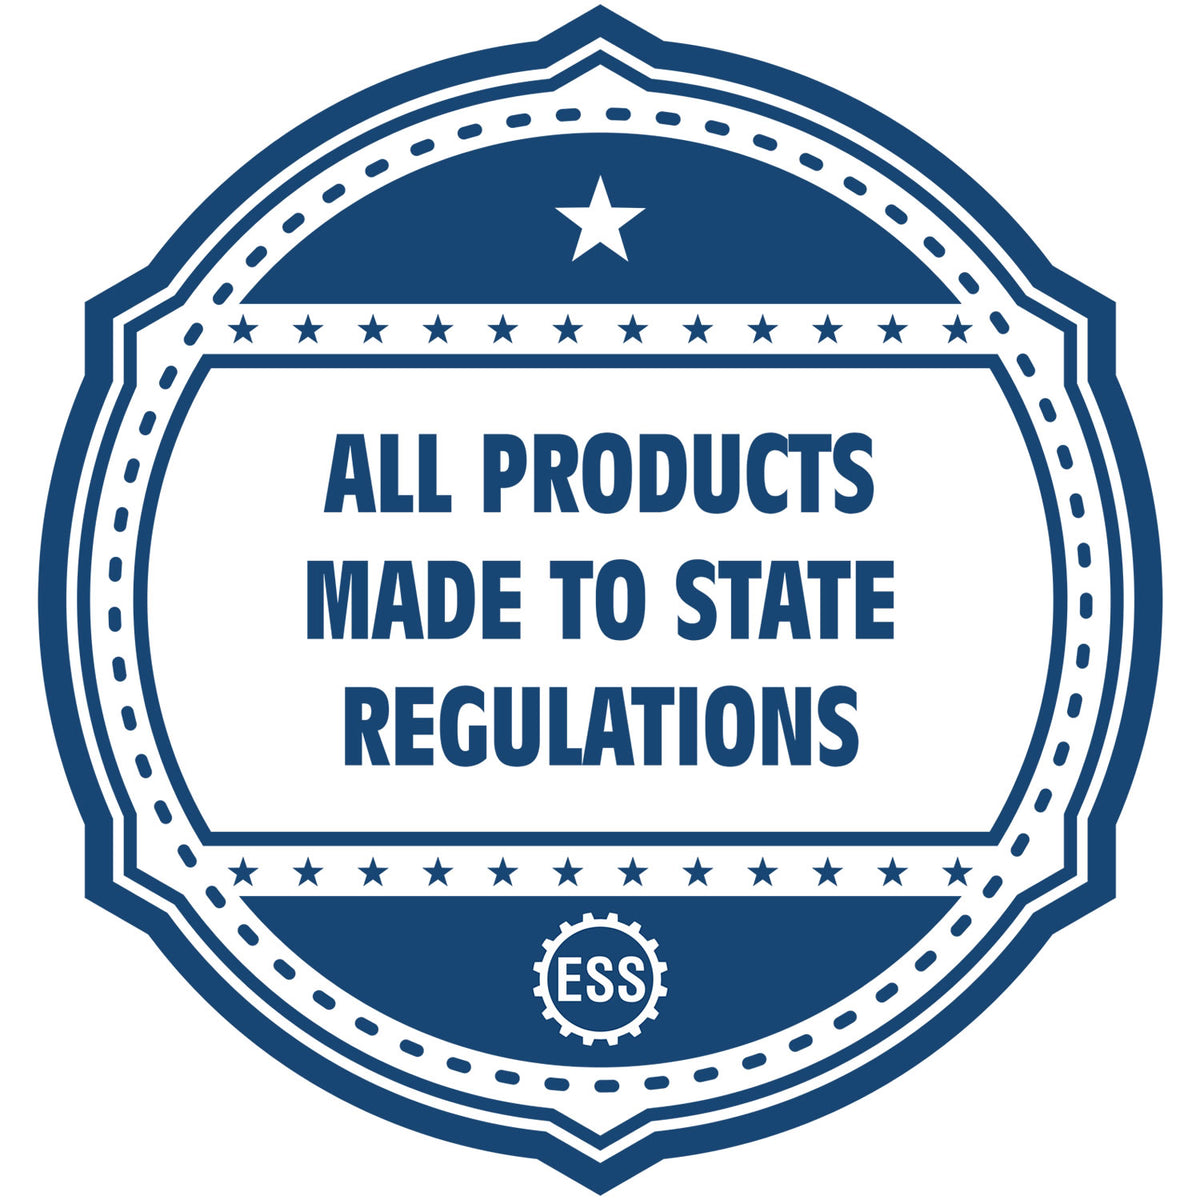 An icon or badge element for the Premium MaxLight Pre-Inked California Engineering Stamp showing that this product is made in compliance with state regulations.